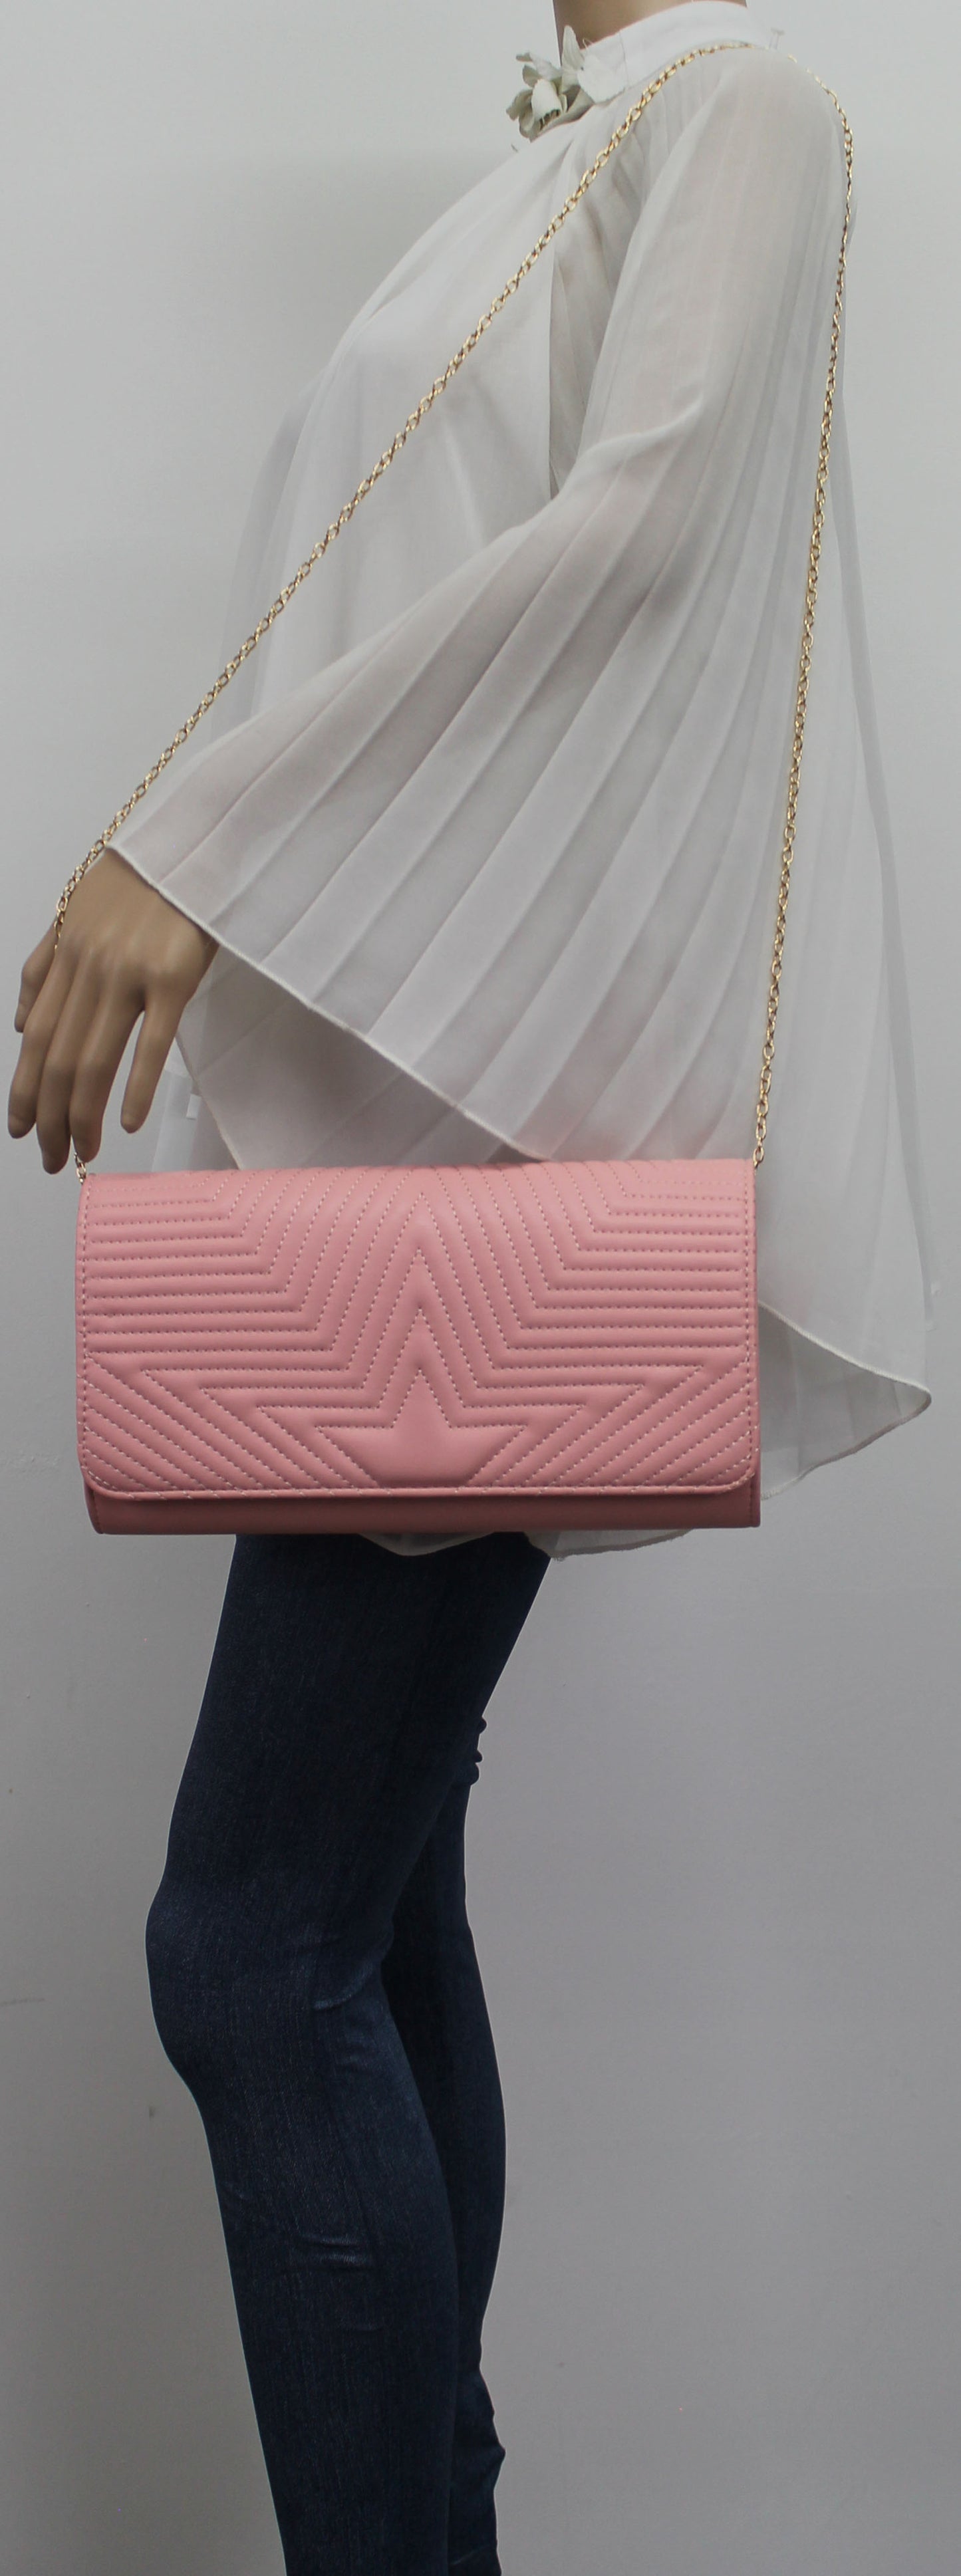 SWANKYSWANS Michelle Clutch Bag Pink Cute Cheap Clutch Bag For Weddings School and Work